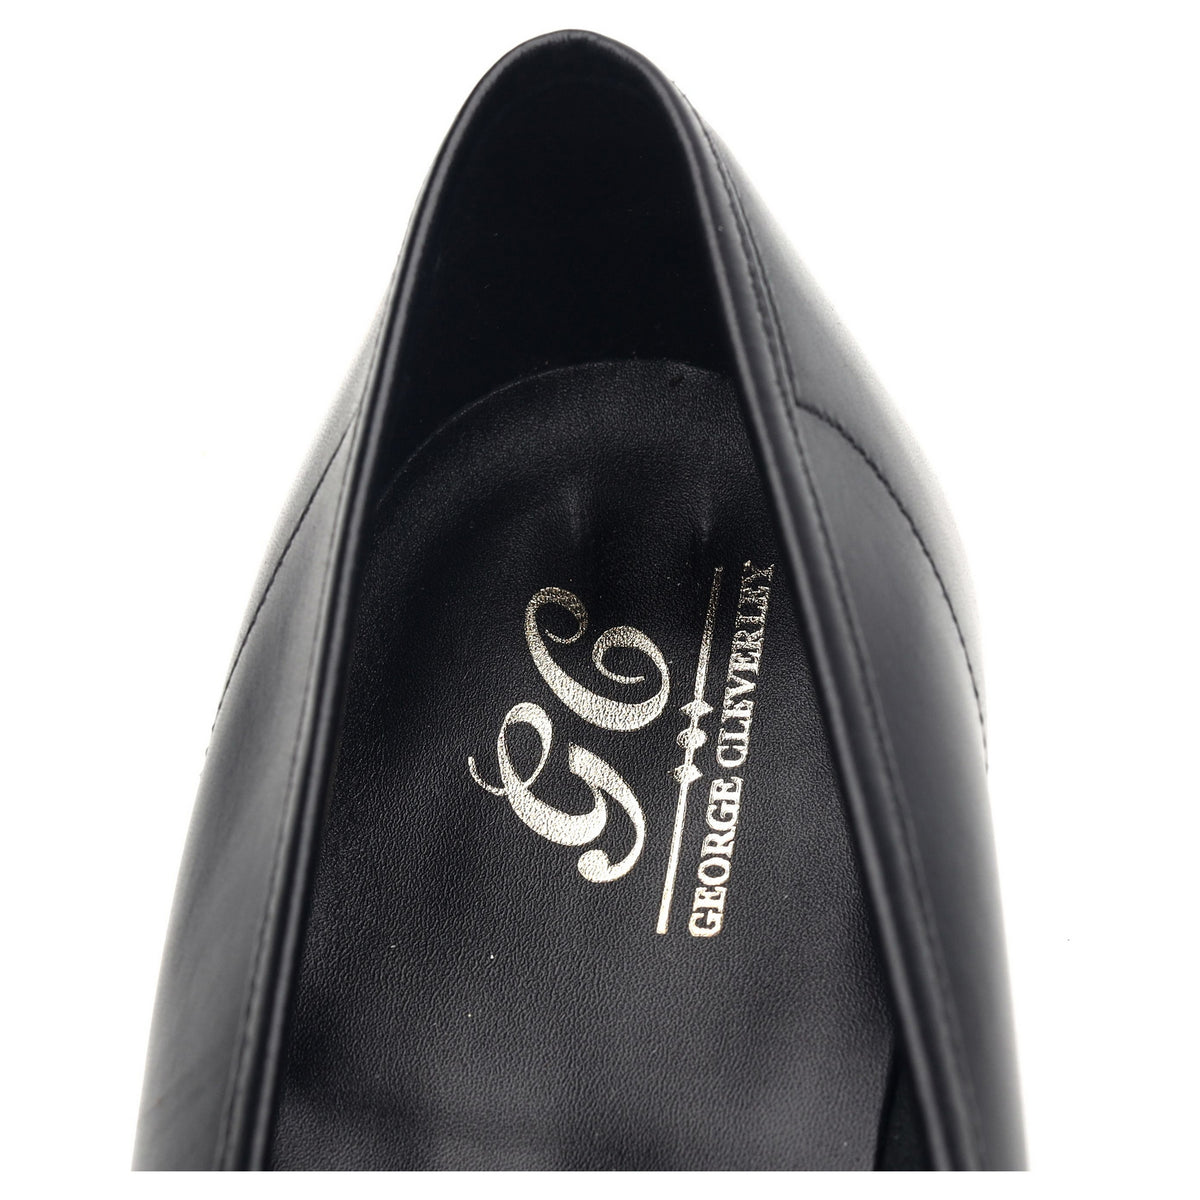 &#39;George&#39; Black Leather Loafers UK 7.5 E